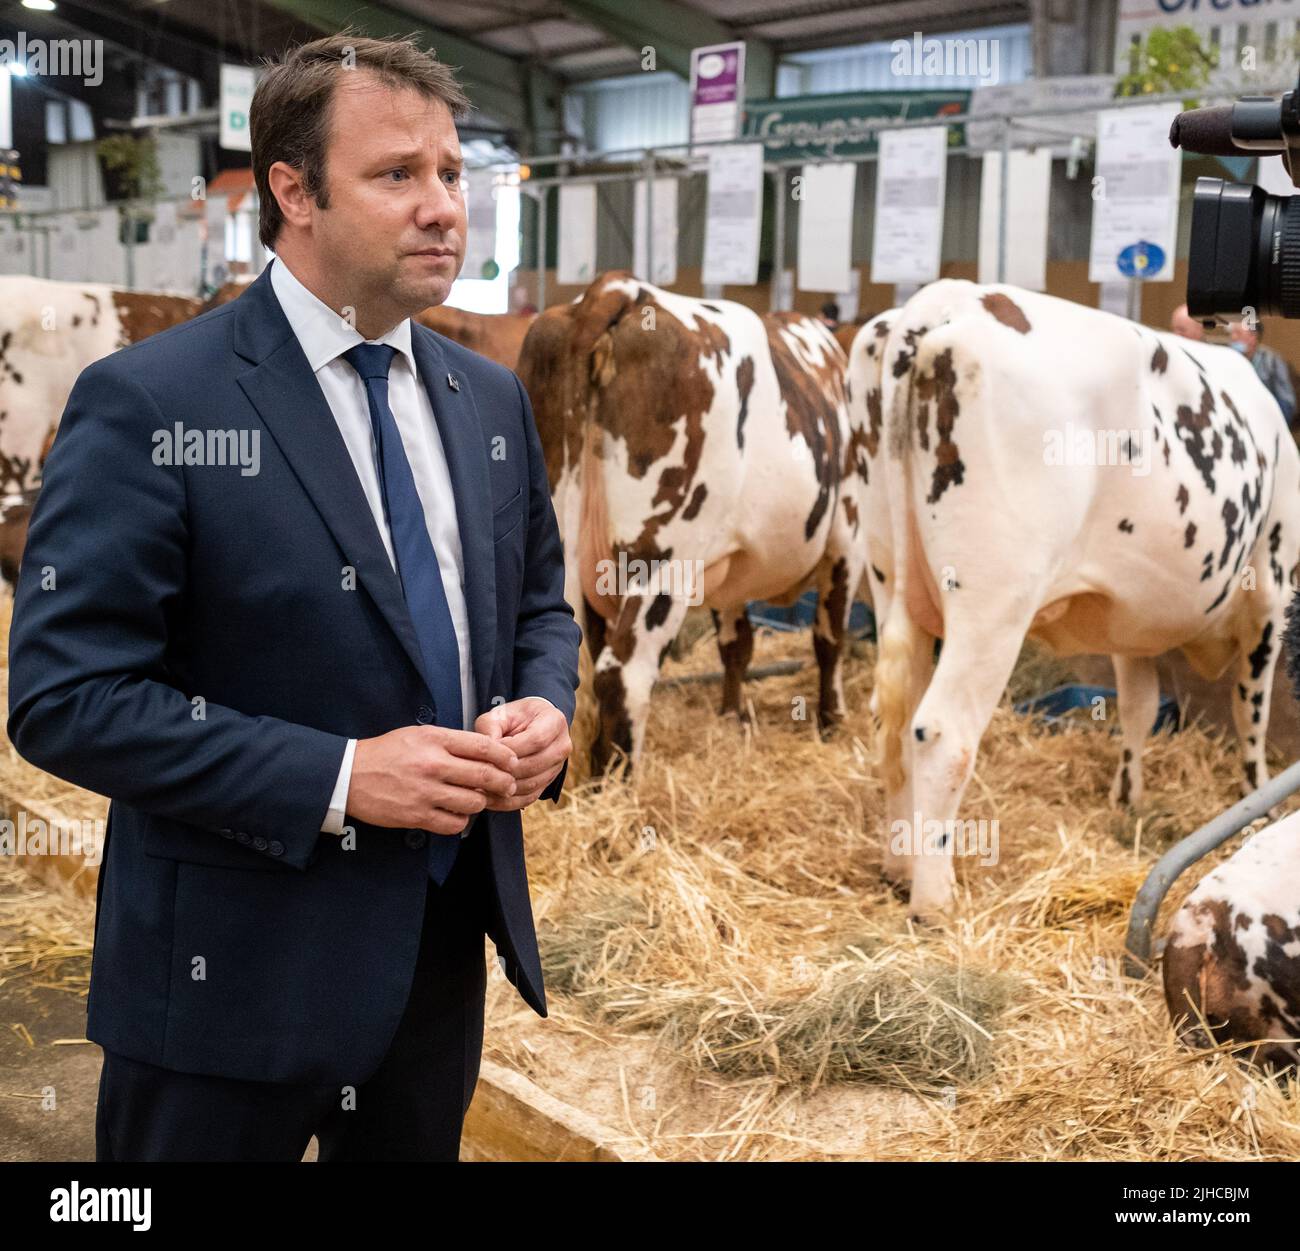 Loig Chesnais-Girard, President of the Region of Brittany, at SPACE, the international animal production exhibition, at the Rennes exhibition centre. France. Stock Photo